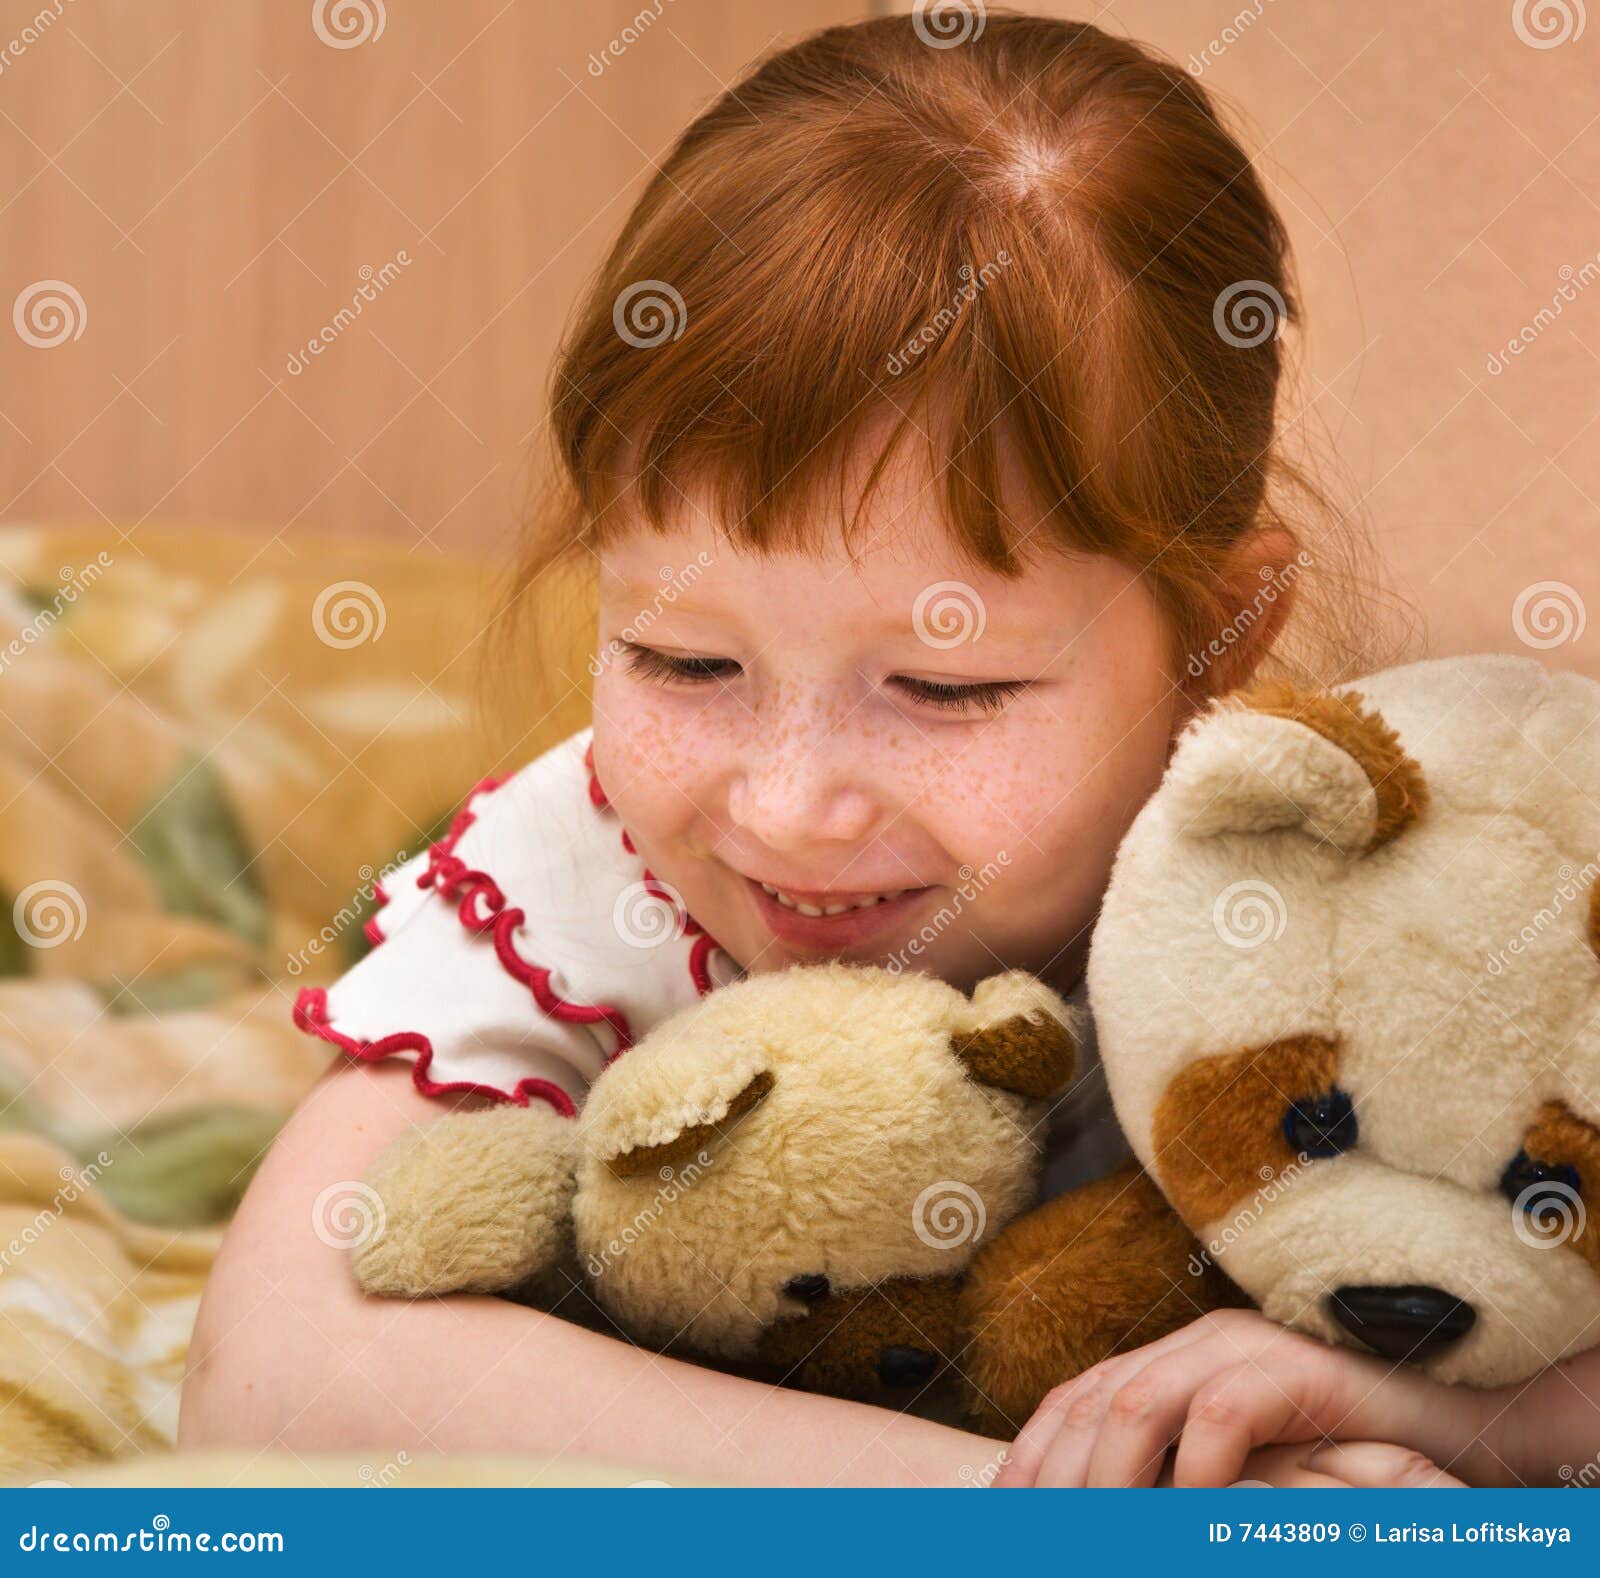 Redheaded Child with Teddy Bears Stock Image - Image of young, bear ...